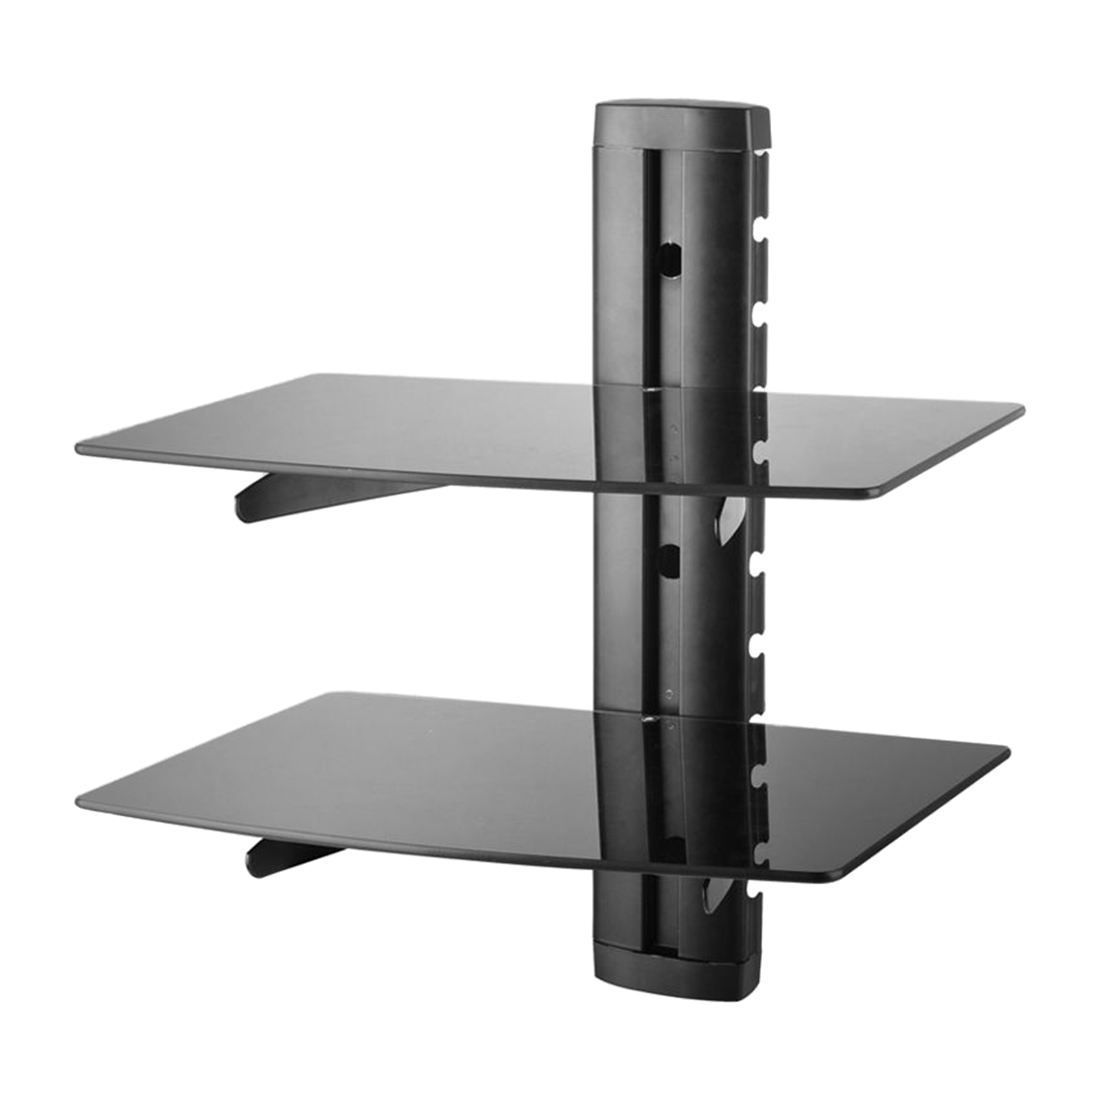 Dvd Player Shelf Promotion Shop For Promotional Dvd Player Shelf Pertaining To Glass Floating Shelves For Dvd Player (View 11 of 12)